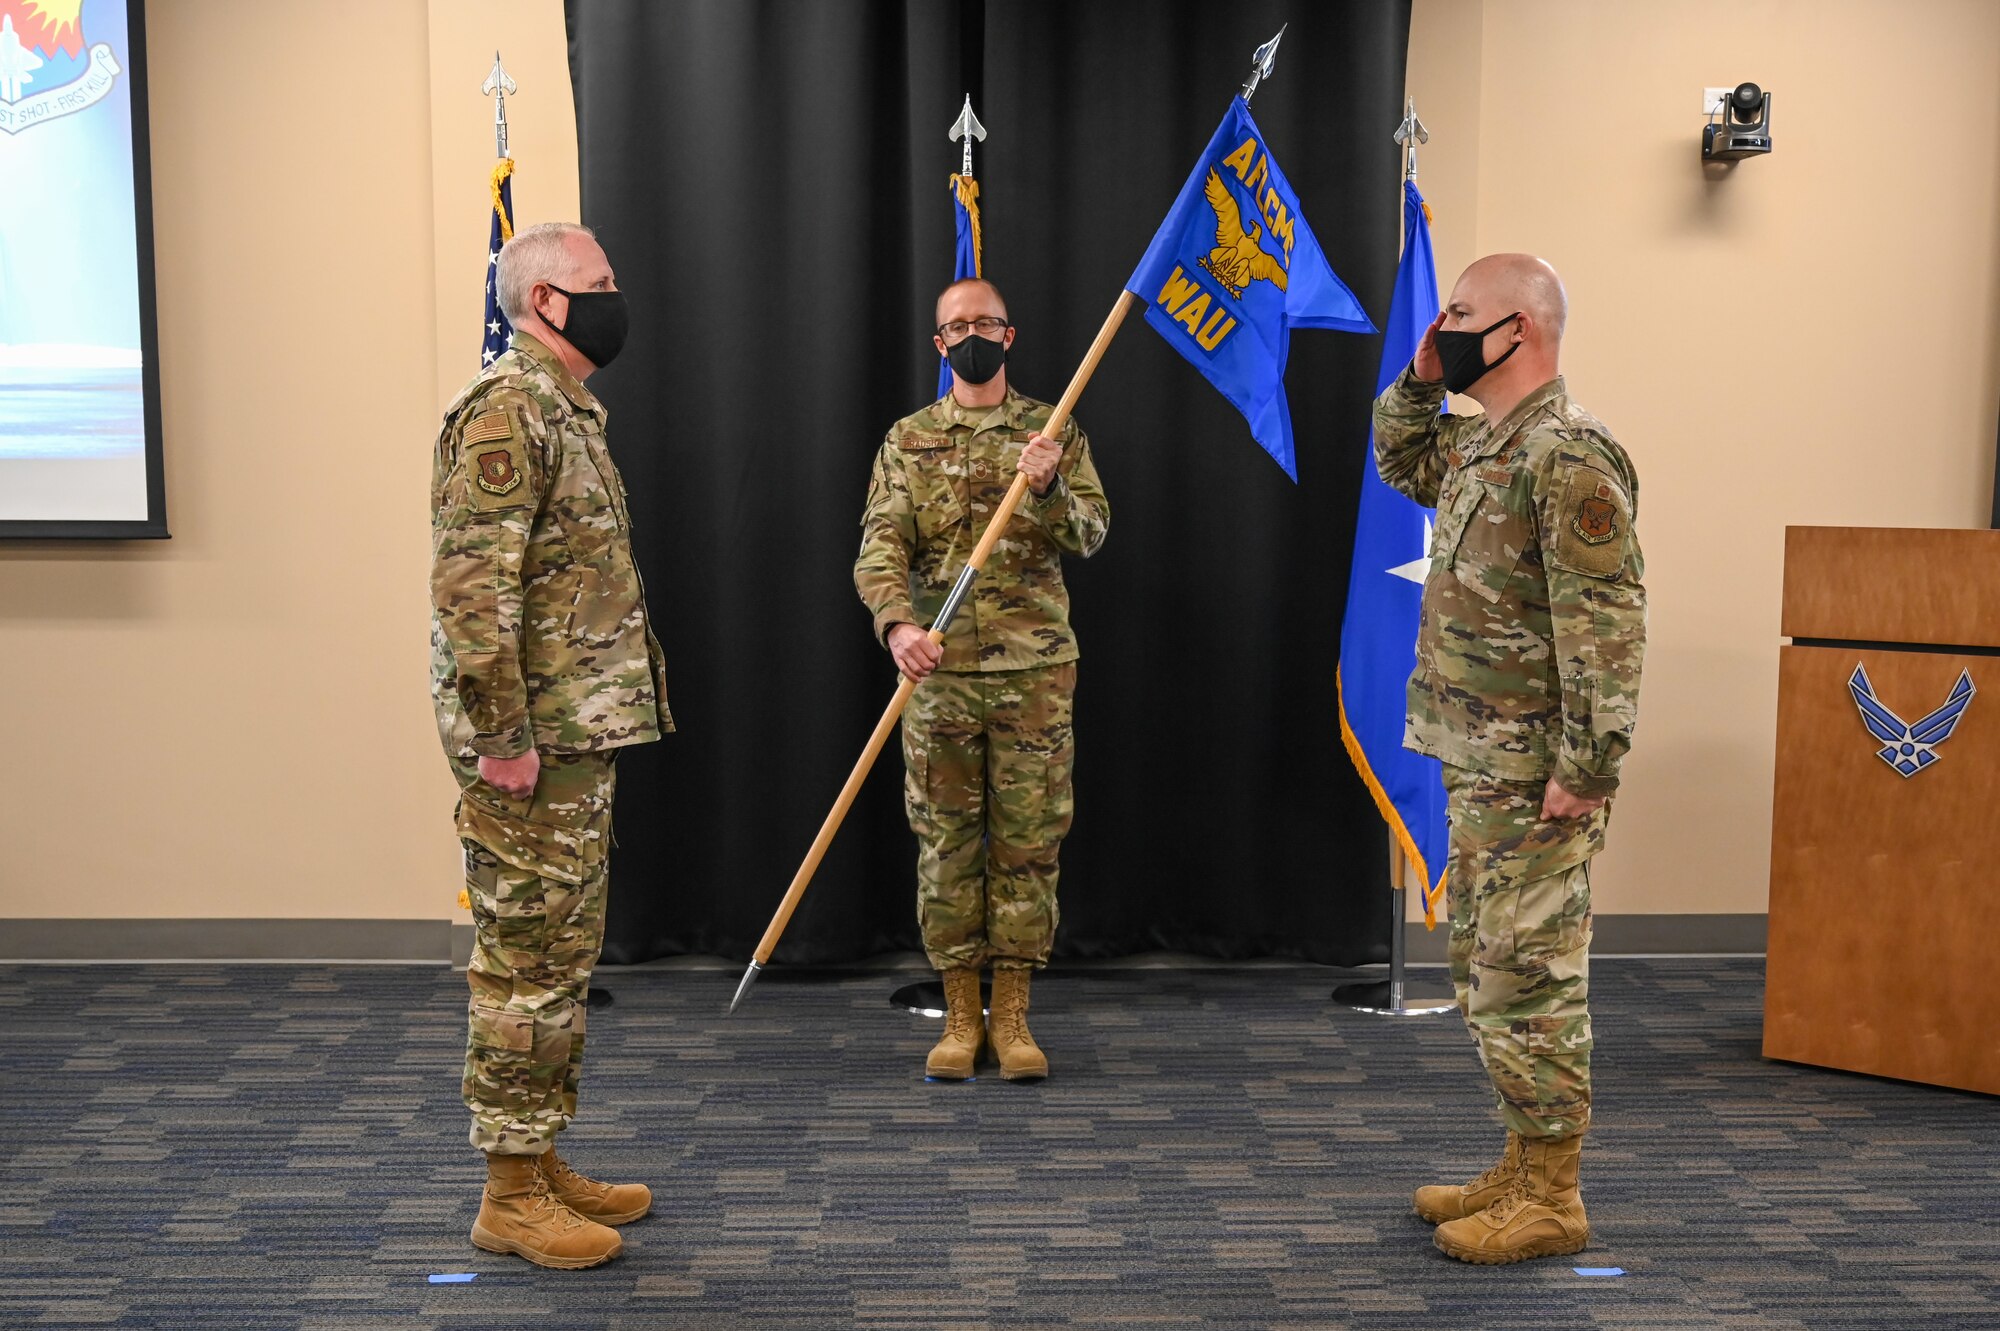 Col. Owen Stephens, F-22 Program Director, Fighters and Advanced Aircraft Directorate, Air Force Life Cycle Management Center (right), salutes Brig. Gen. Dale White, Executive Officer, Fighters and Advanced Aircraft, AFLCMC, at the F-22 Program Office Transfer Ceremony.